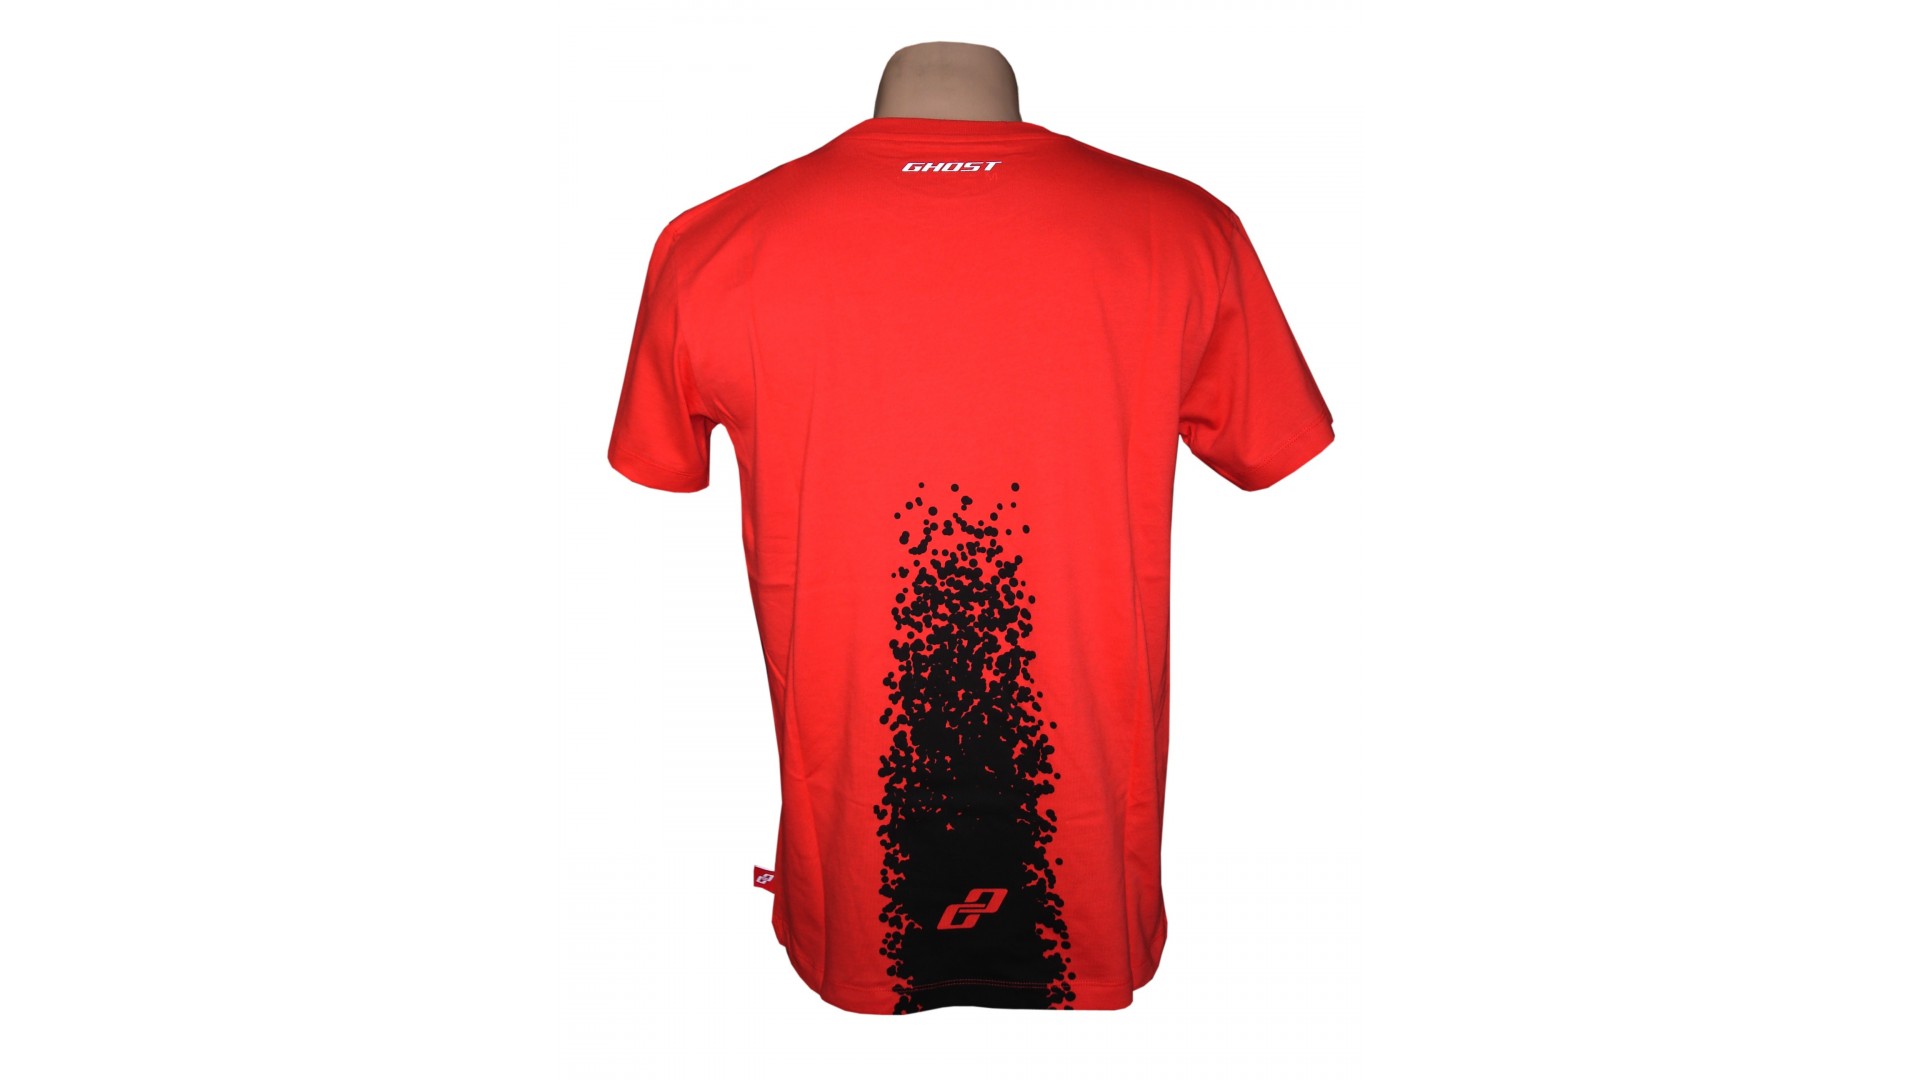 Футболка Ghost T-shirt Expect Riot red год 2014